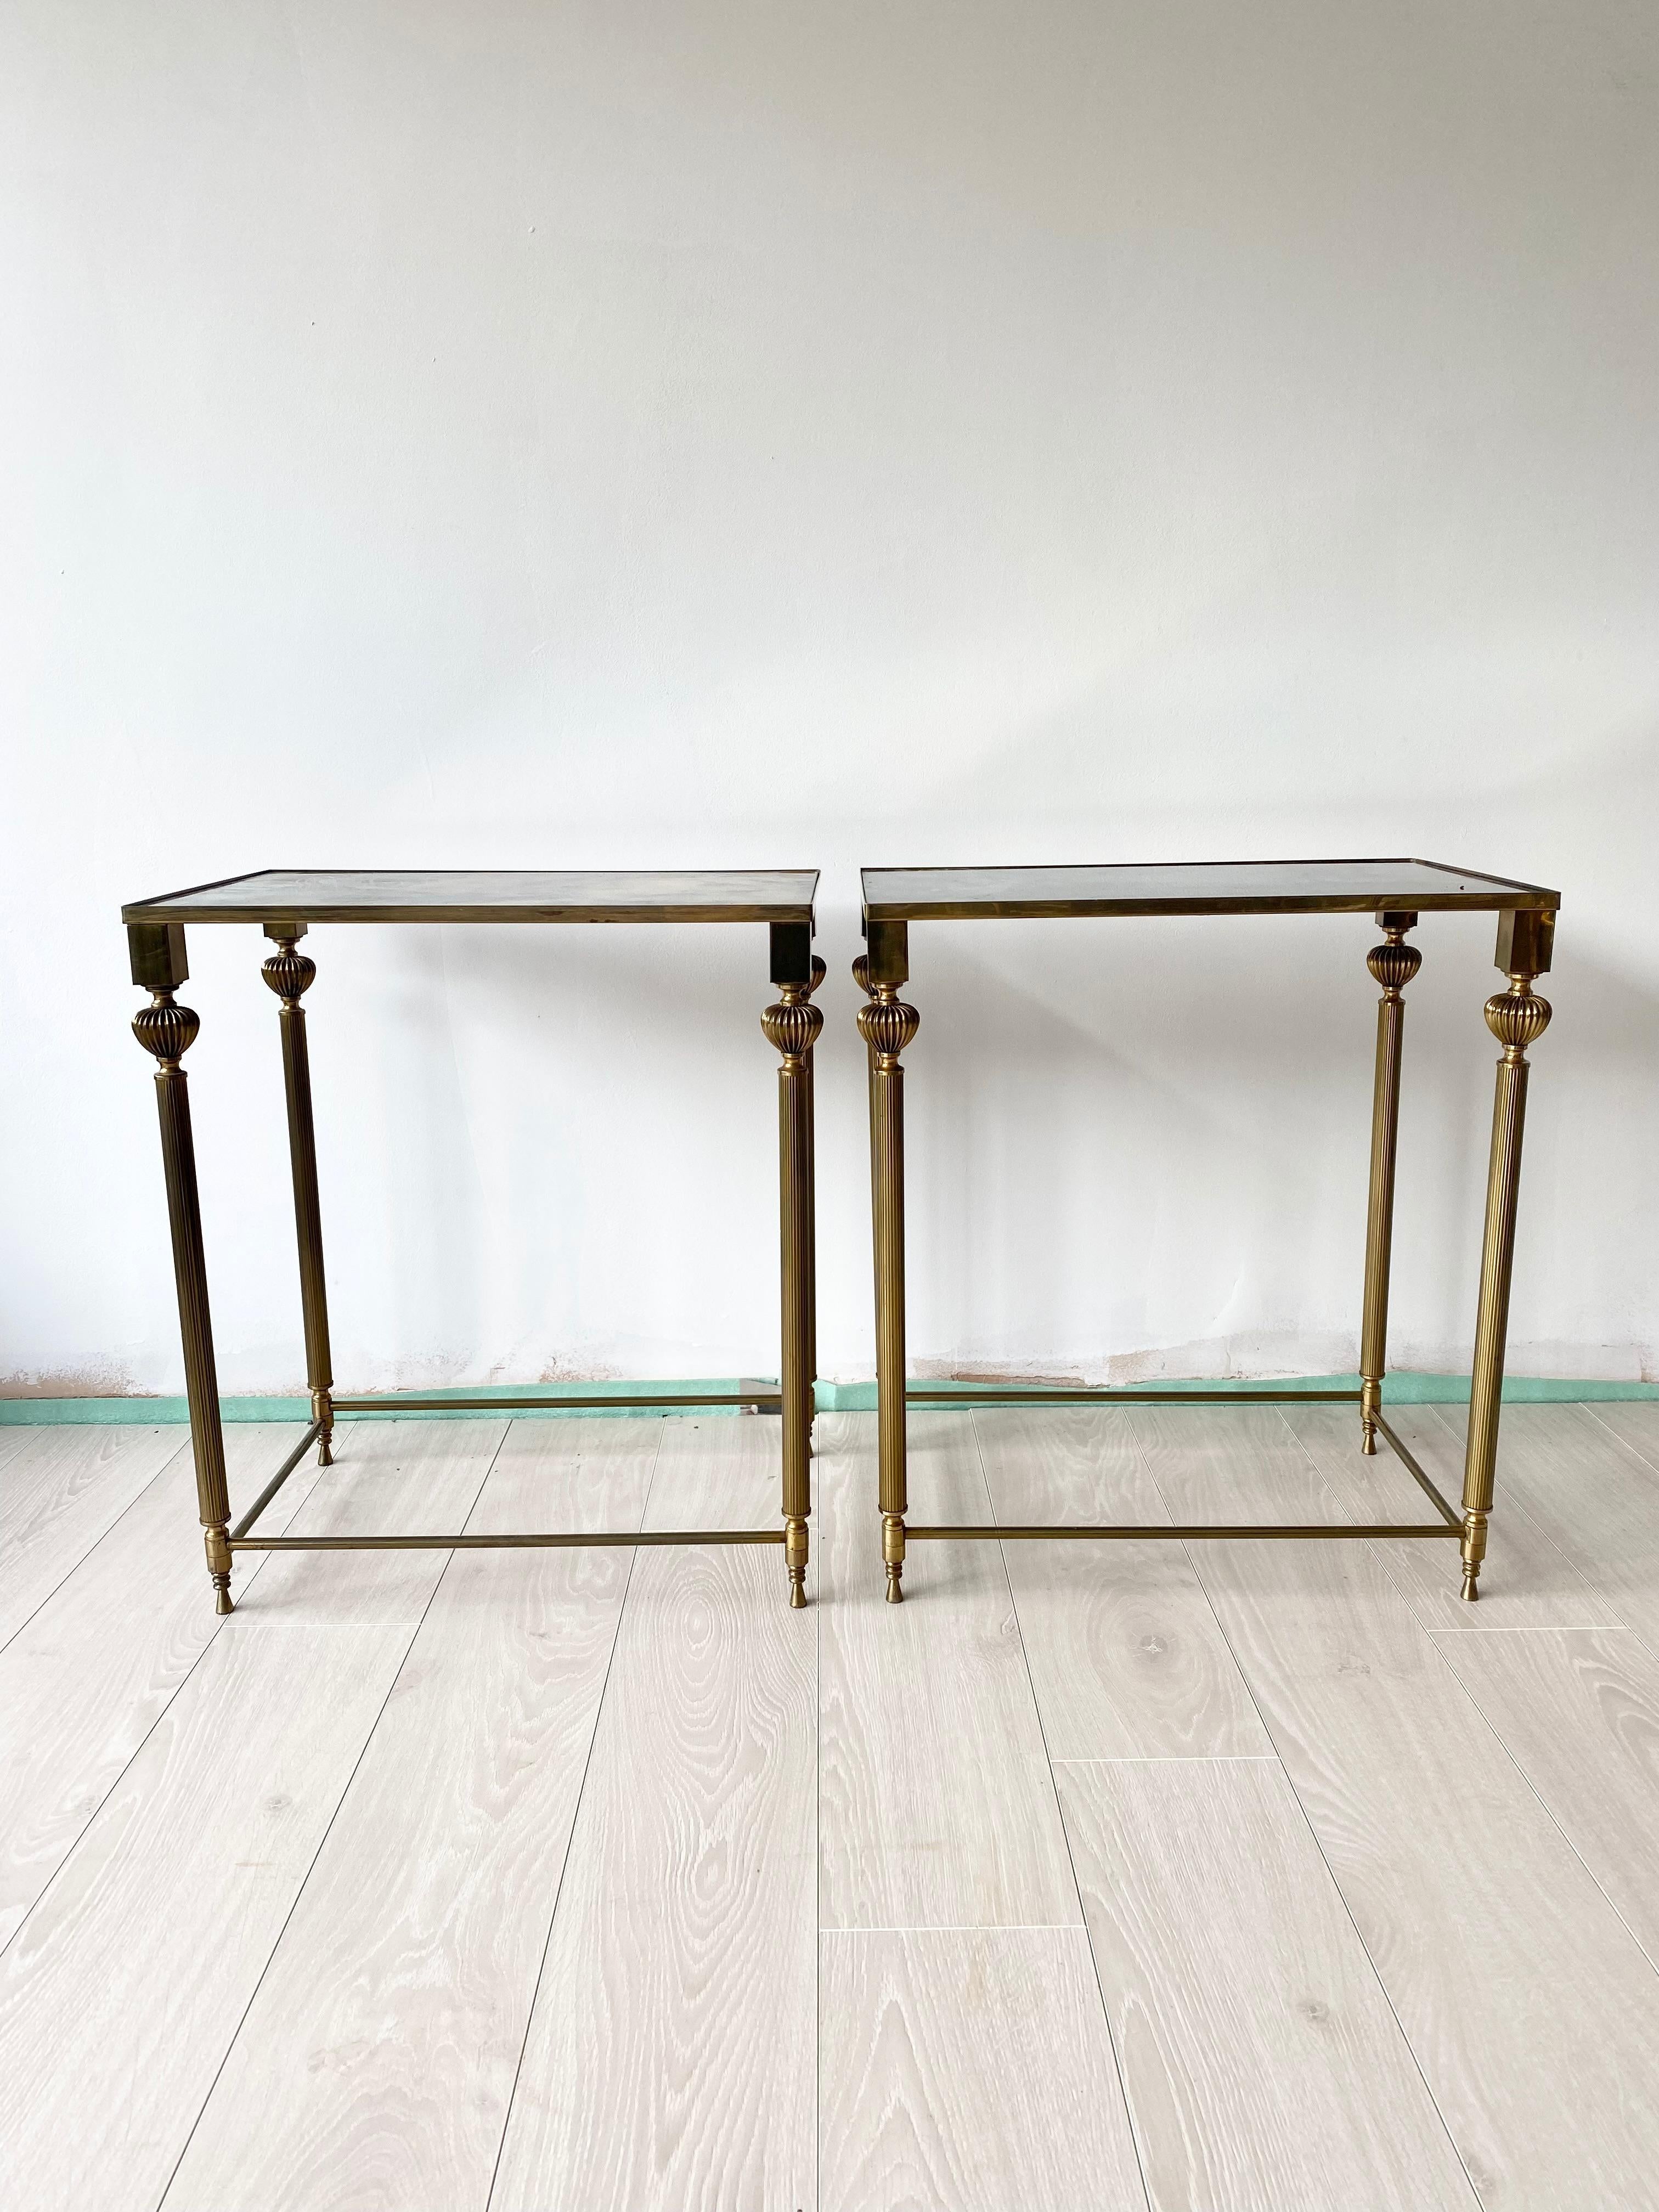 Beautiful pair of tall side tables

Aged brass frame with verre eglomise tops 

Measure 50.5cm by 32.5cm and stand 57cm tall.